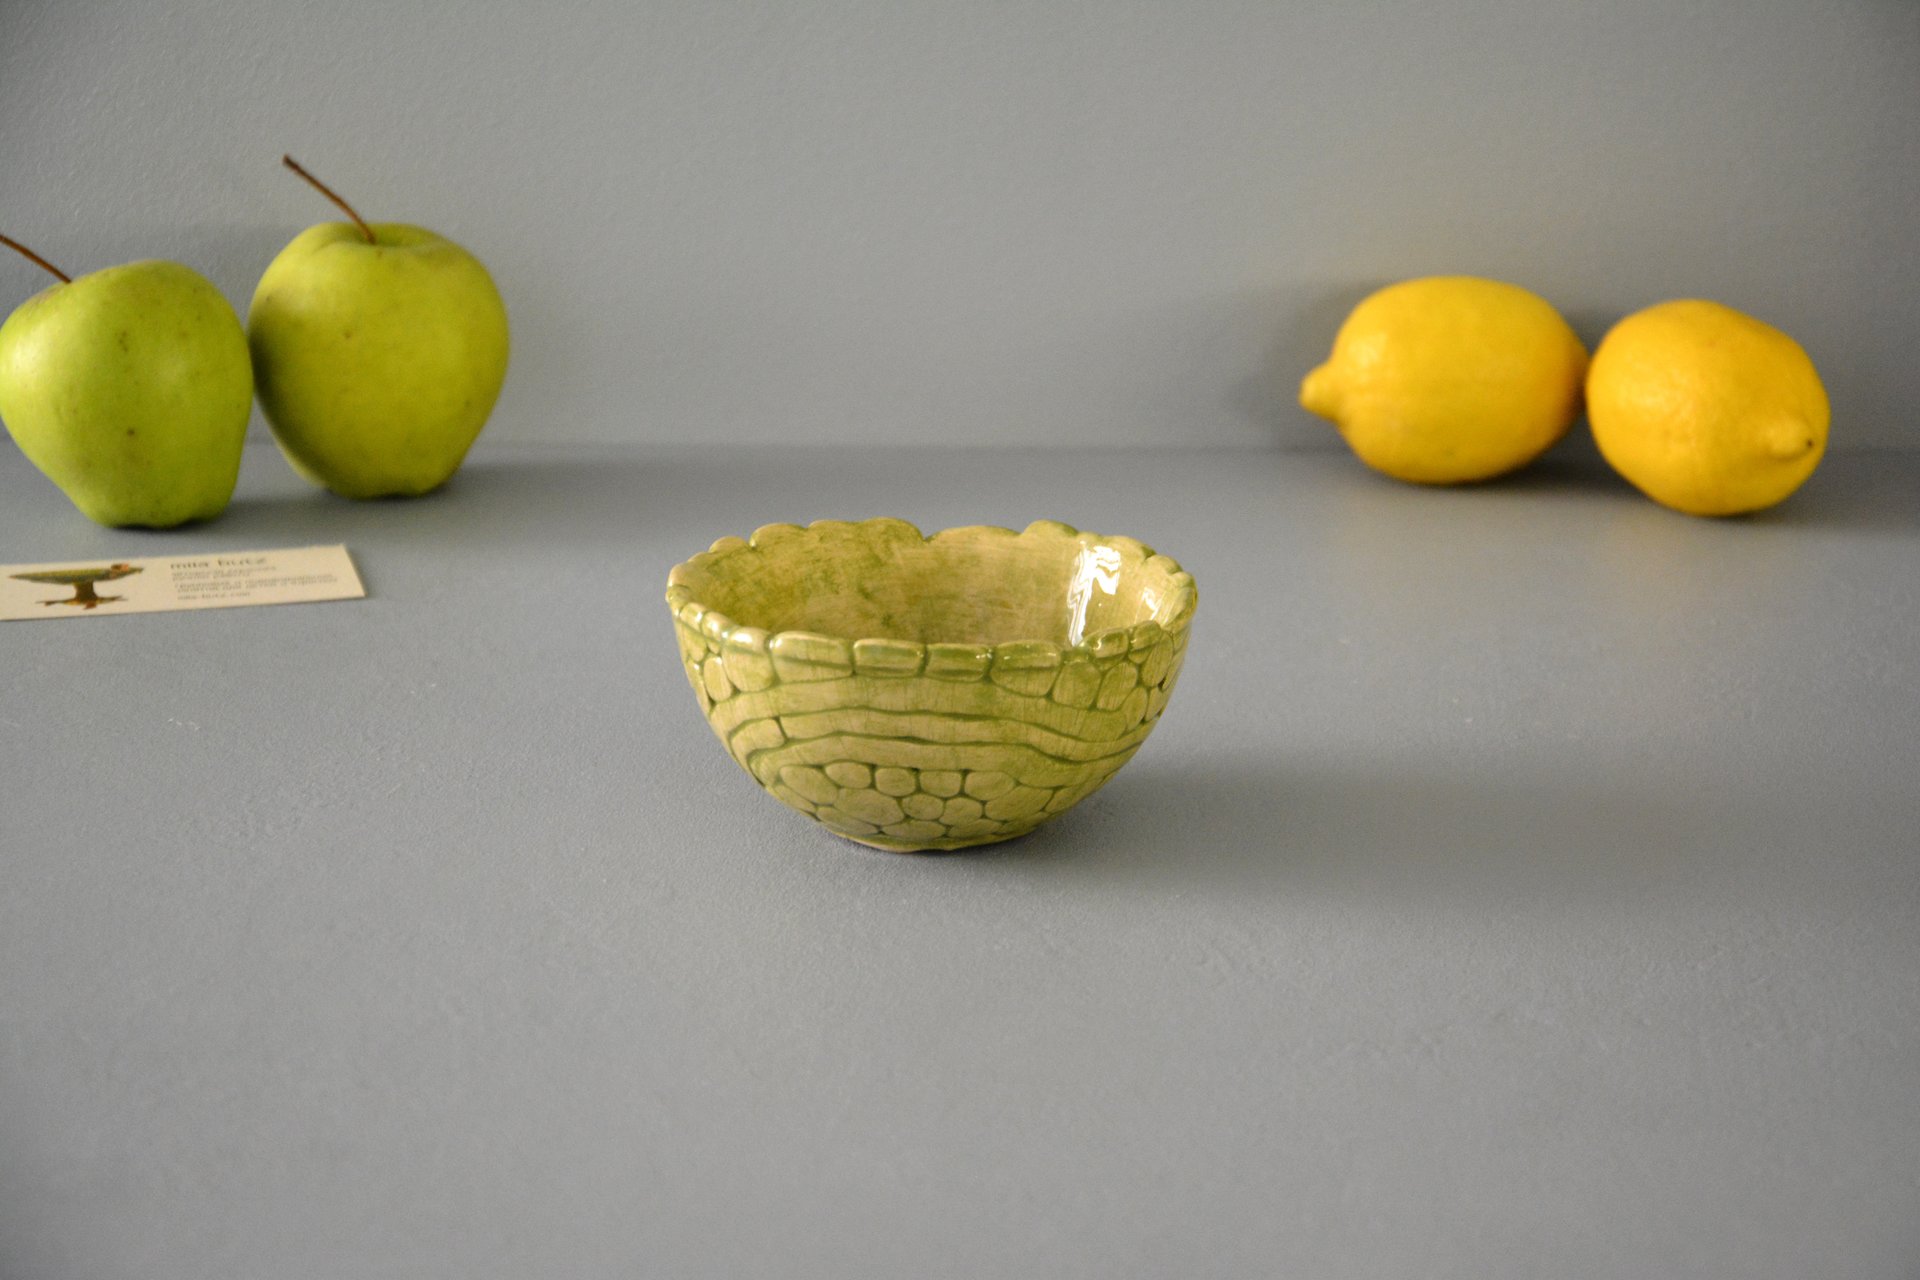 Light Green patina - Pialy and sauceboats, height - 6 cm, diameter - 11.5 cm, photo 2 of 4.